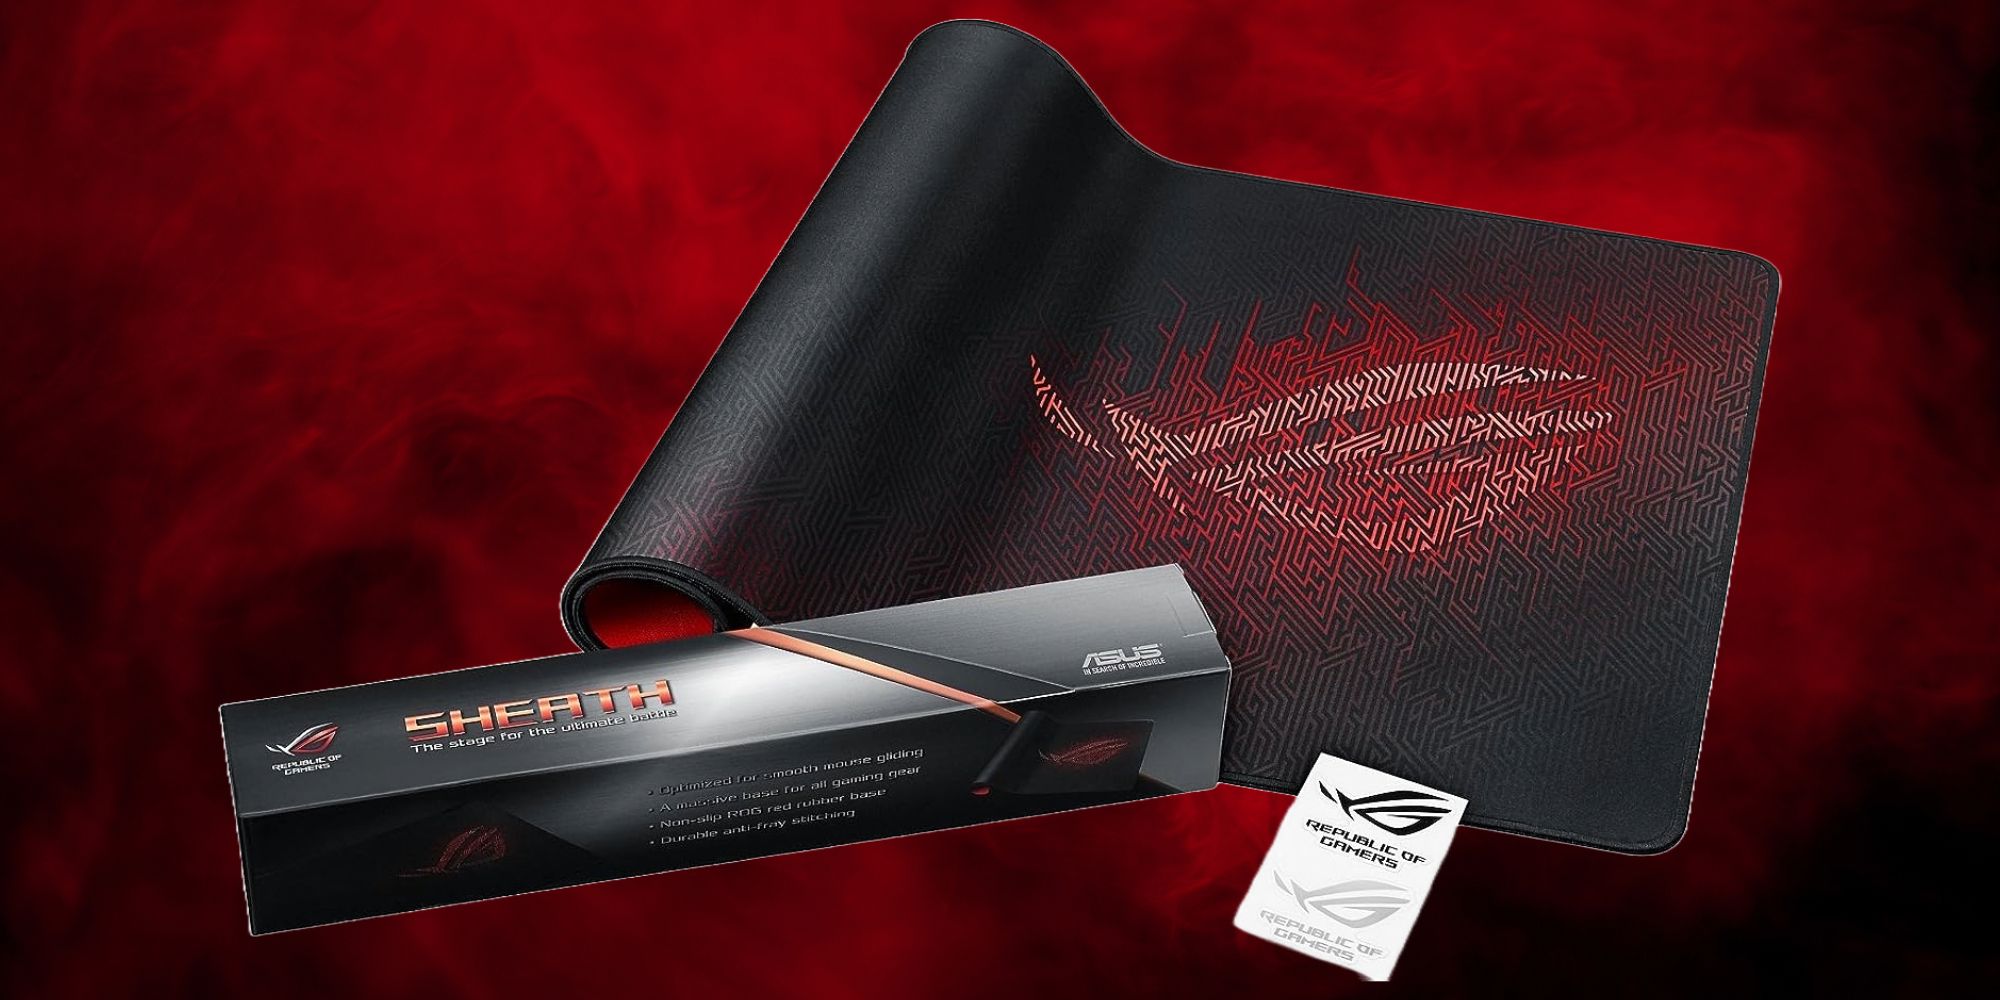 A black and red cloth mousepad with its box and manual against a red smoky backdrop. The box reads 